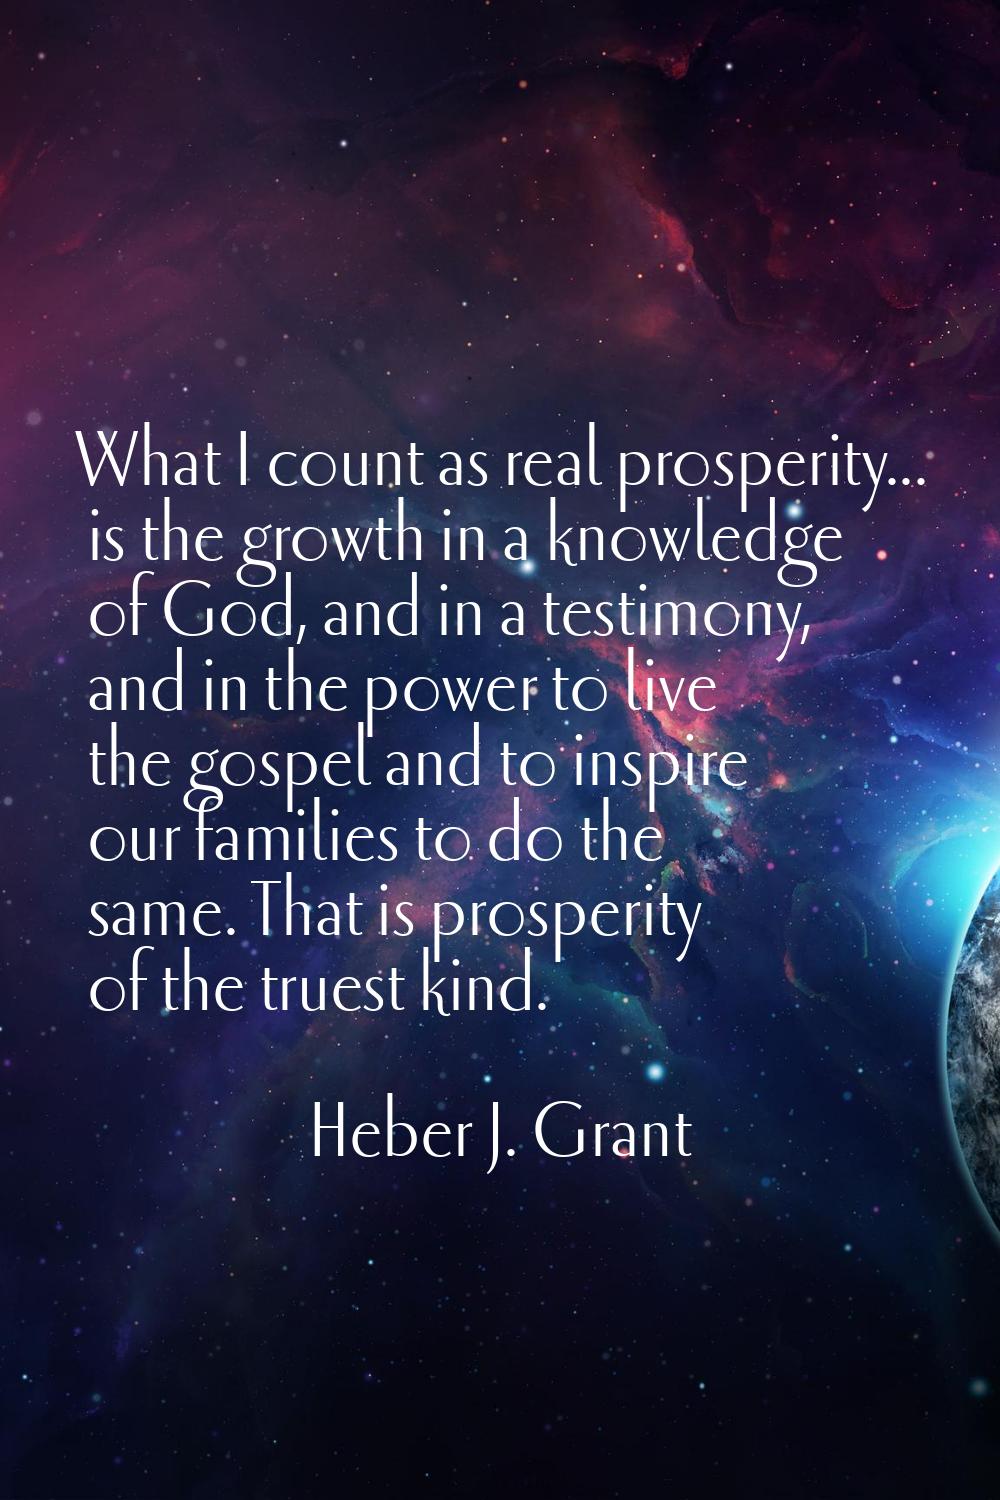 What I count as real prosperity... is the growth in a knowledge of God, and in a testimony, and in 